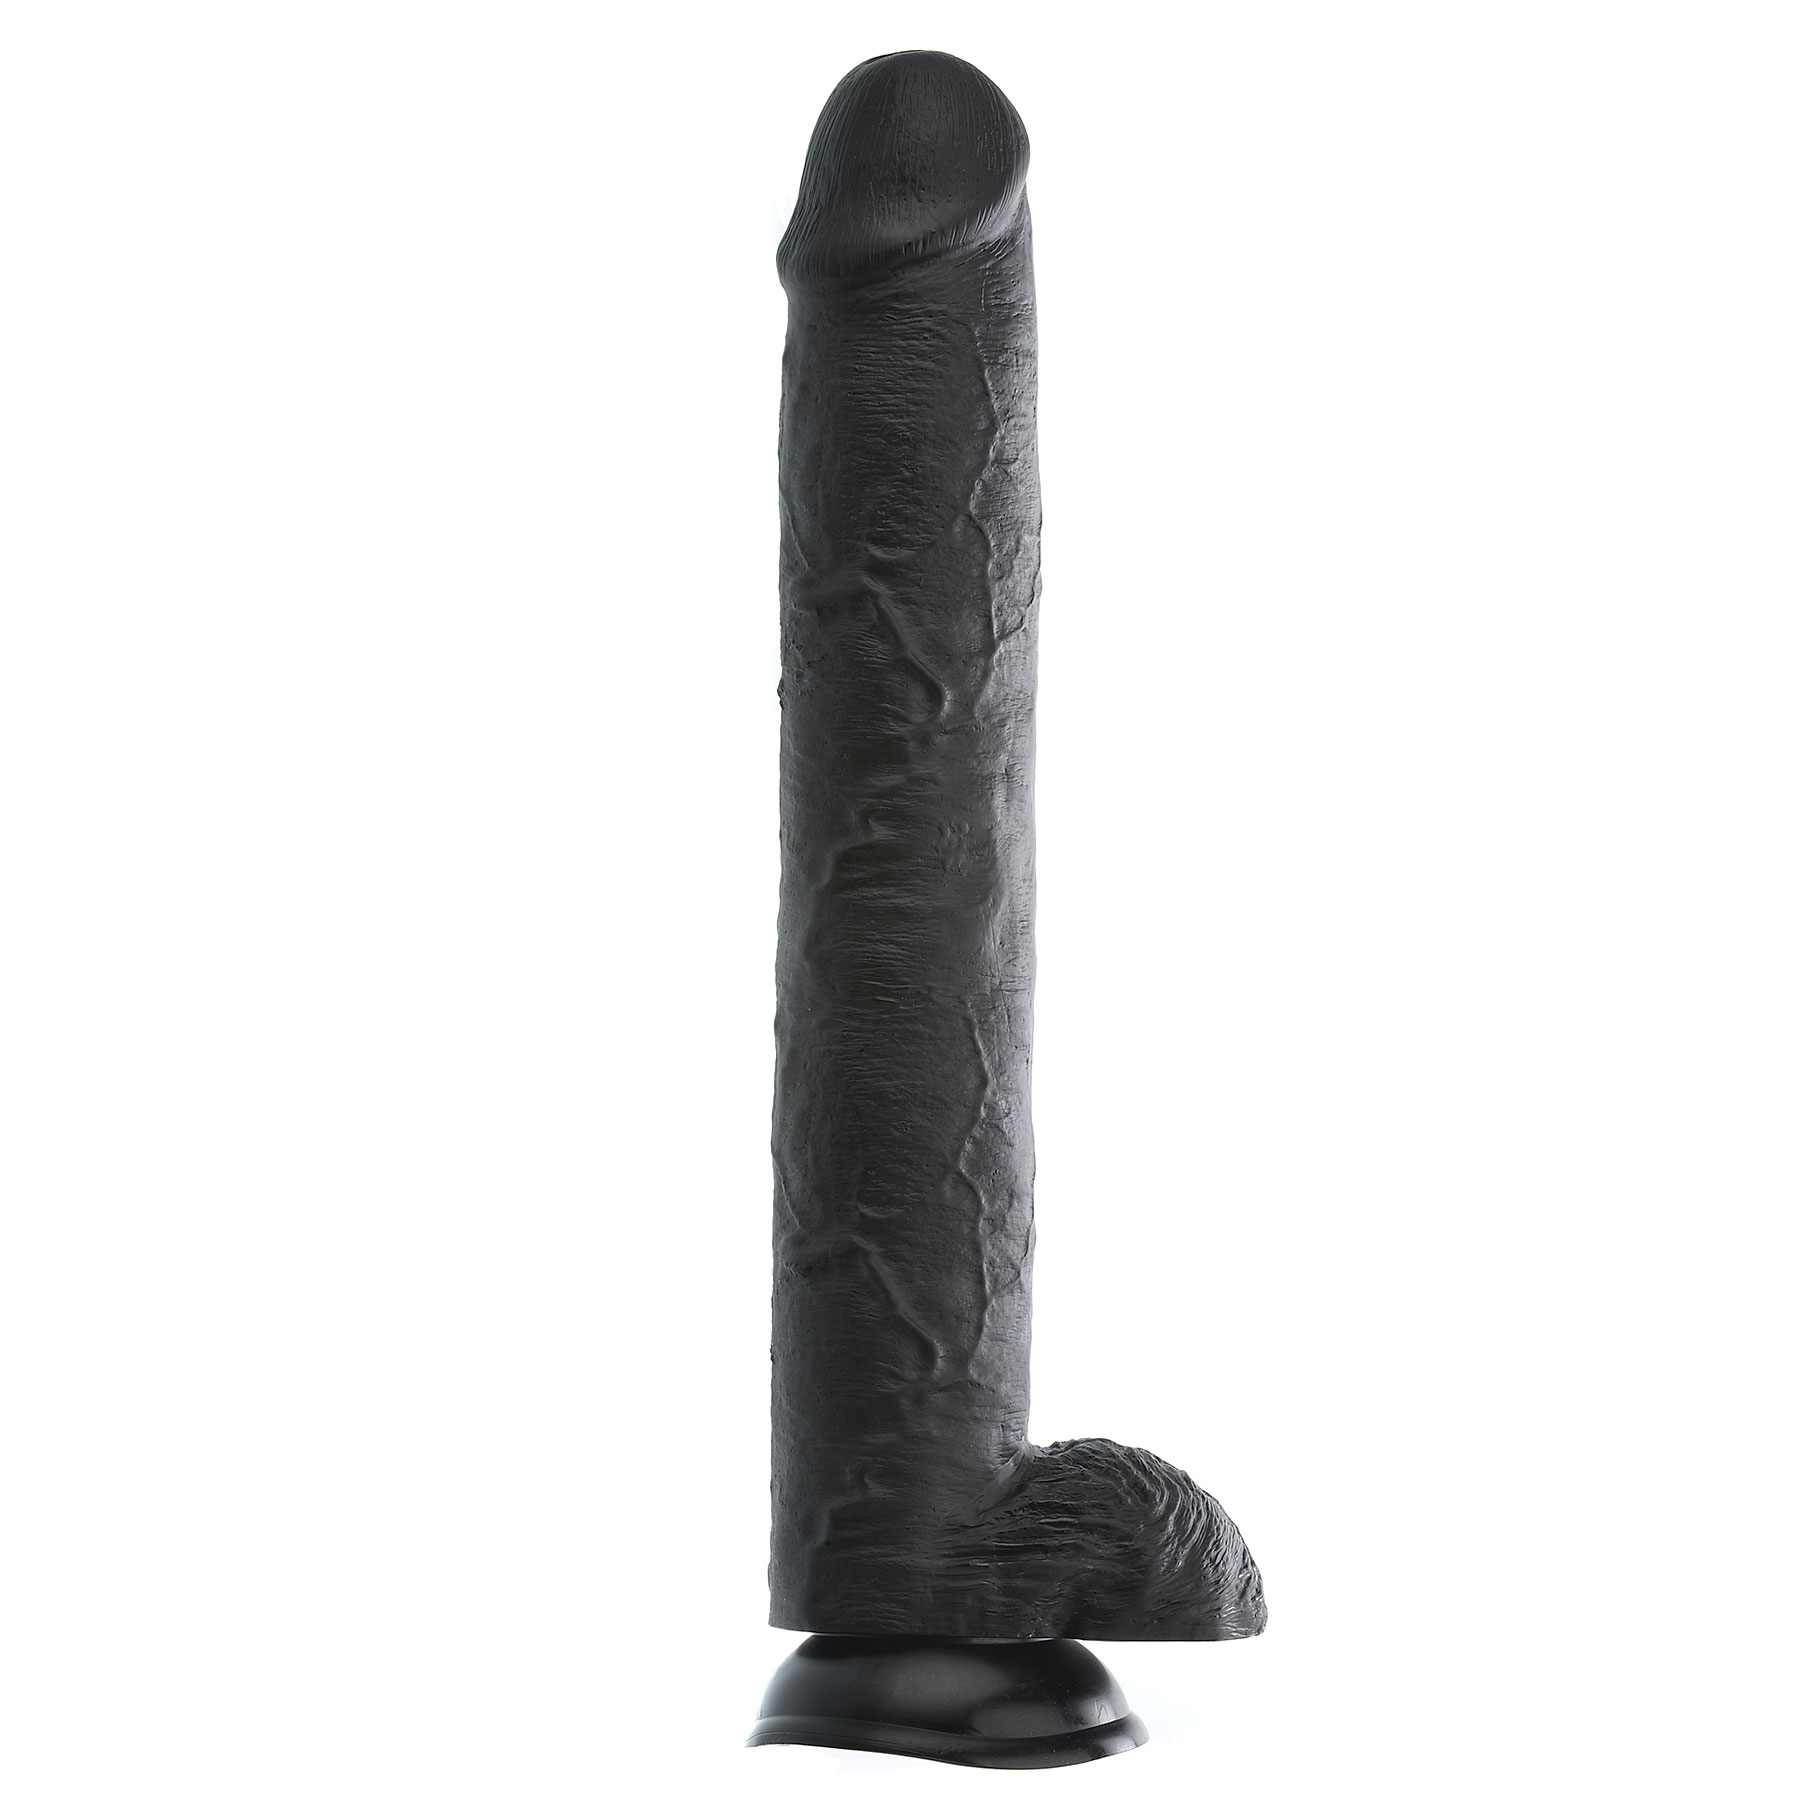 Images Of Dildos